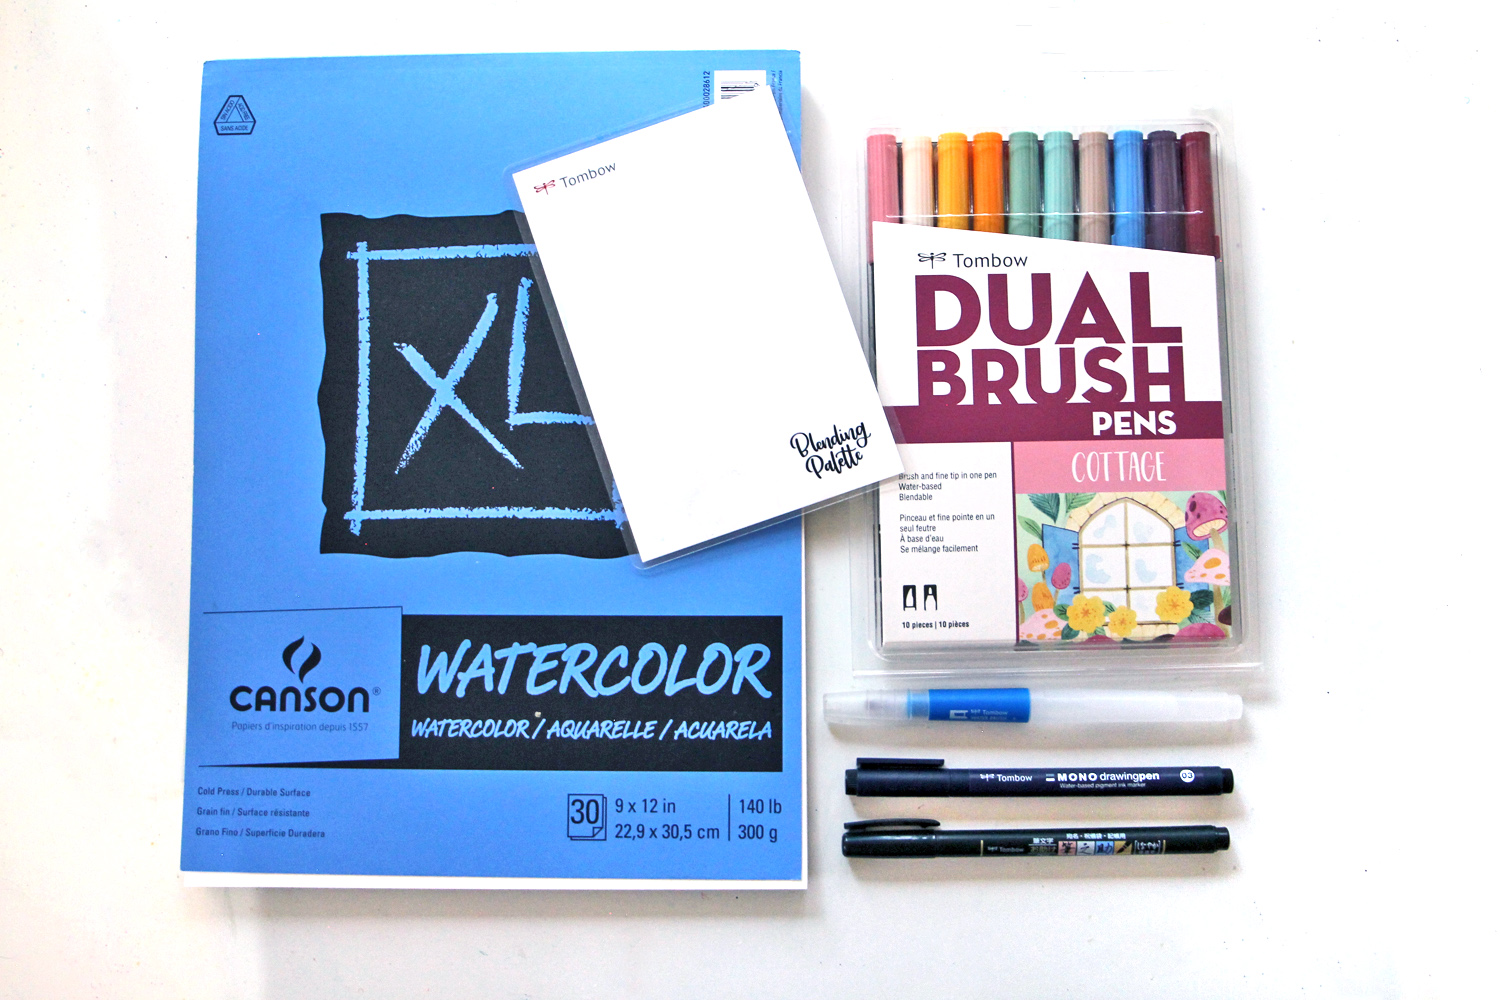 DIY Watercolor Art Inspired by Your Favorite Artist - Katie Smith